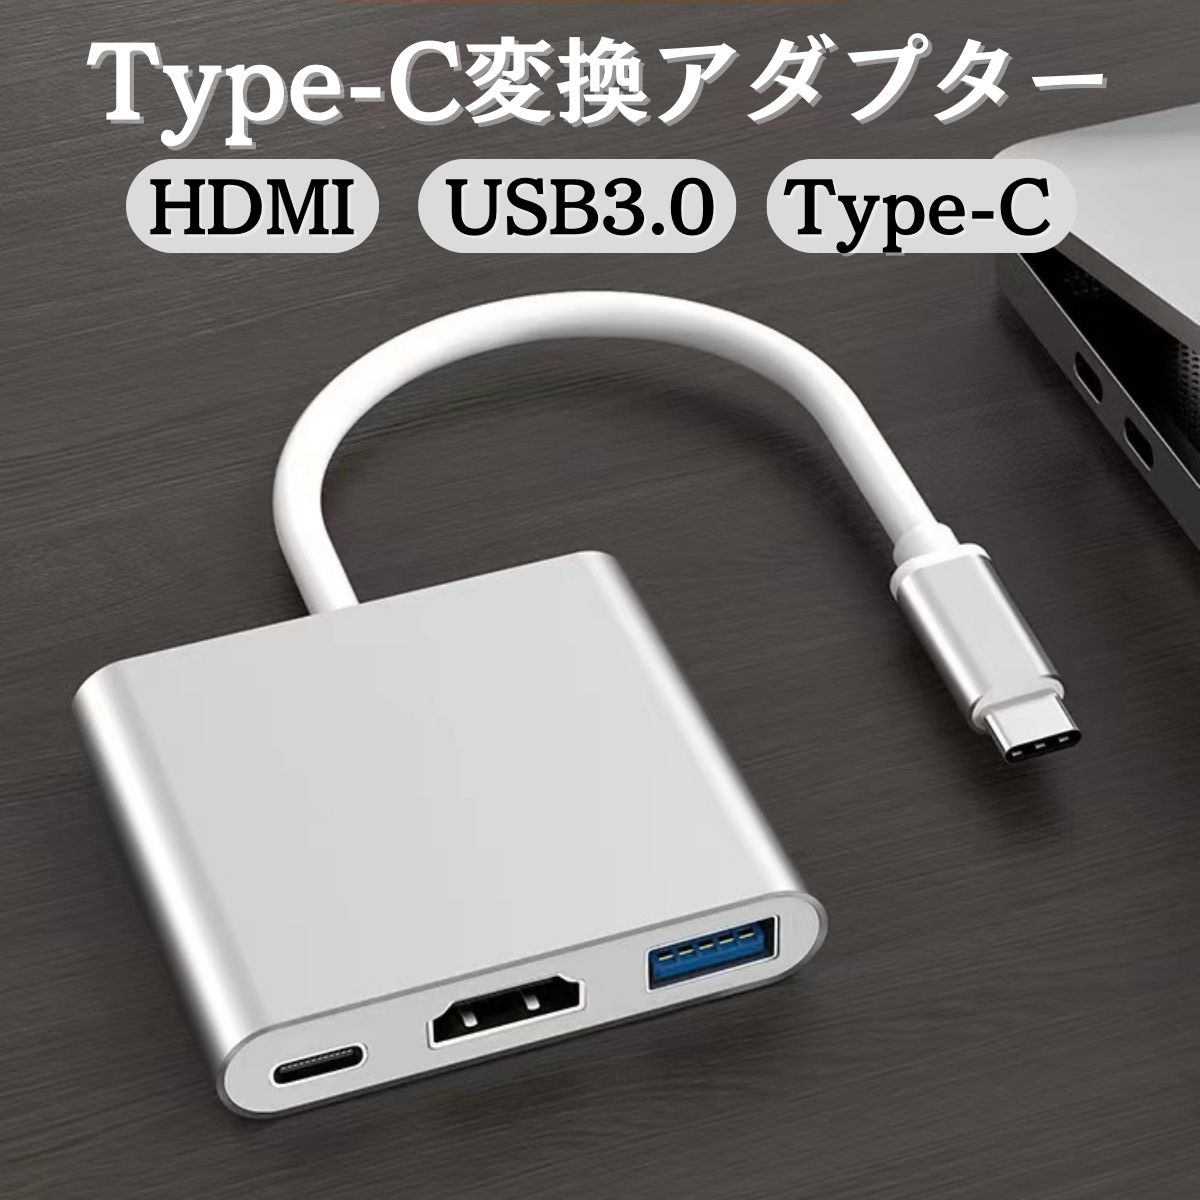 USB Type-C HDMI Ѵץ USB3.0 PD100W c USB-C hdmi֥ Ѵ ץ ץ thunderbolt 3 4 ܥ ϥ Apple MacBook Mac Book Pro iMac Galaxy S22 S21 4K ɥ android